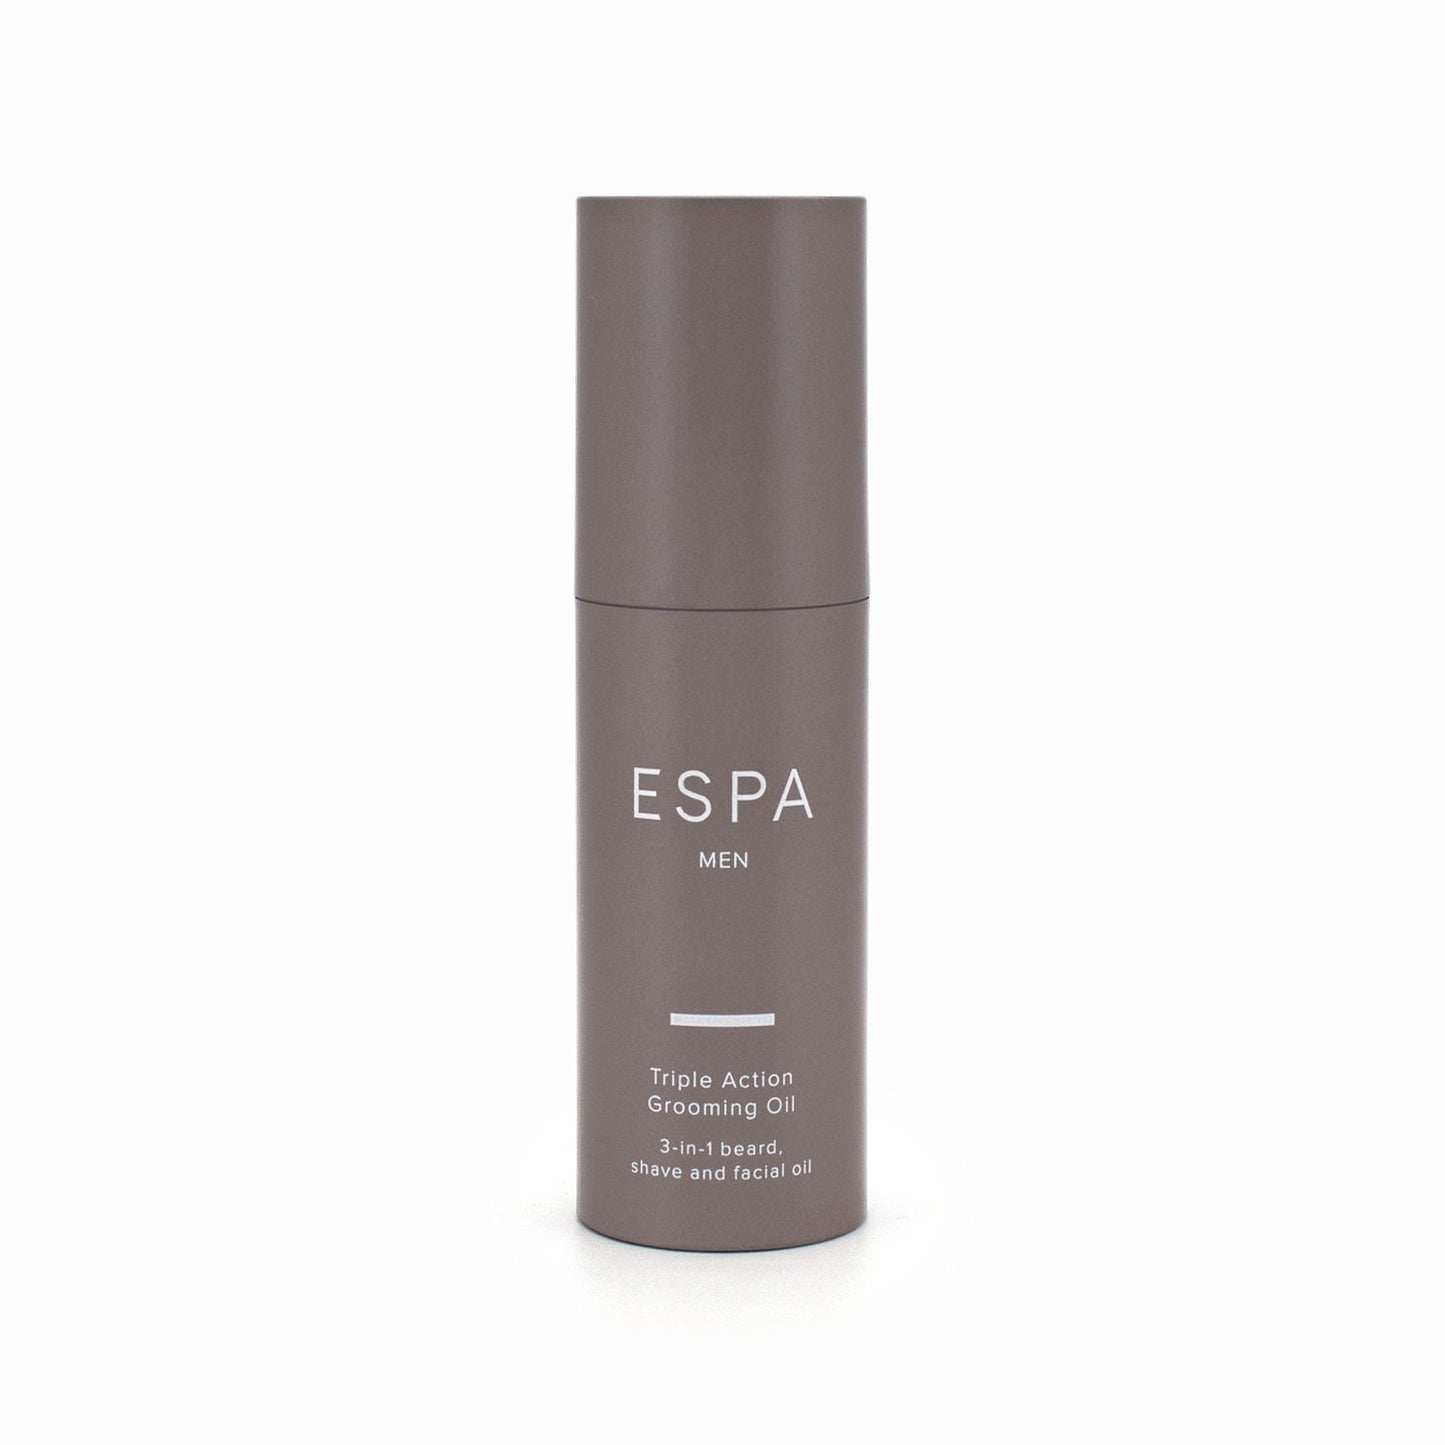 ESPA Men Triple Action Grooming Oil 25ml - Imperfect Box